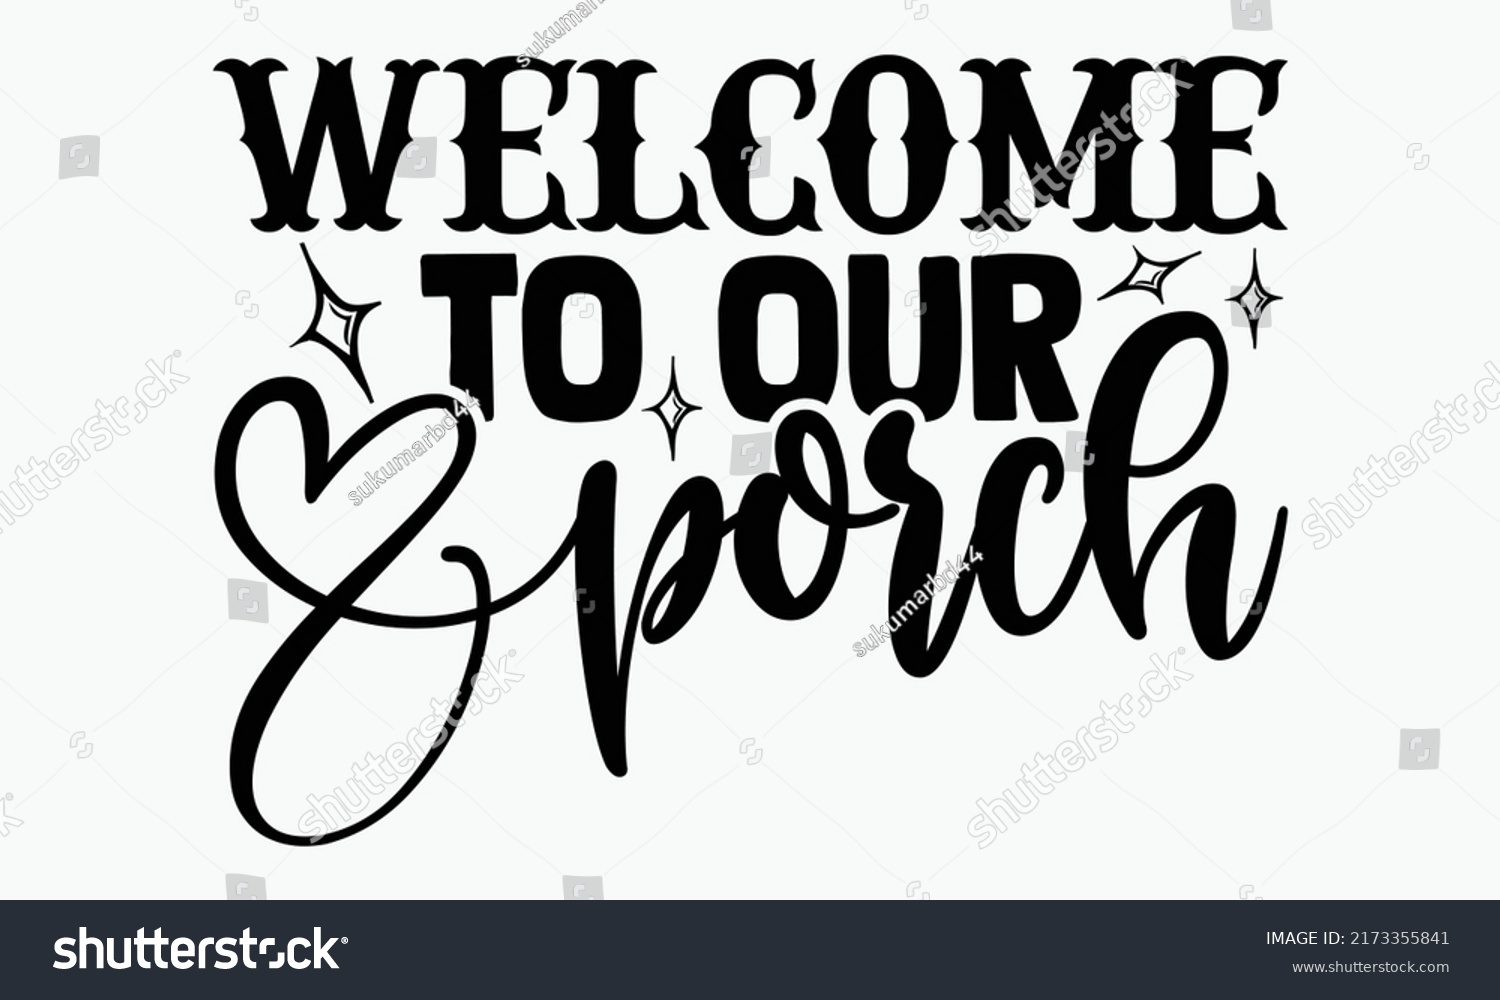 SVG of Welcome to our porch - Porch t shirts design, Hand drawn lettering phrase, Calligraphy t shirt design, Isolated on white background, svg Files for Cutting Cricut and Silhouette, EPS 10 svg